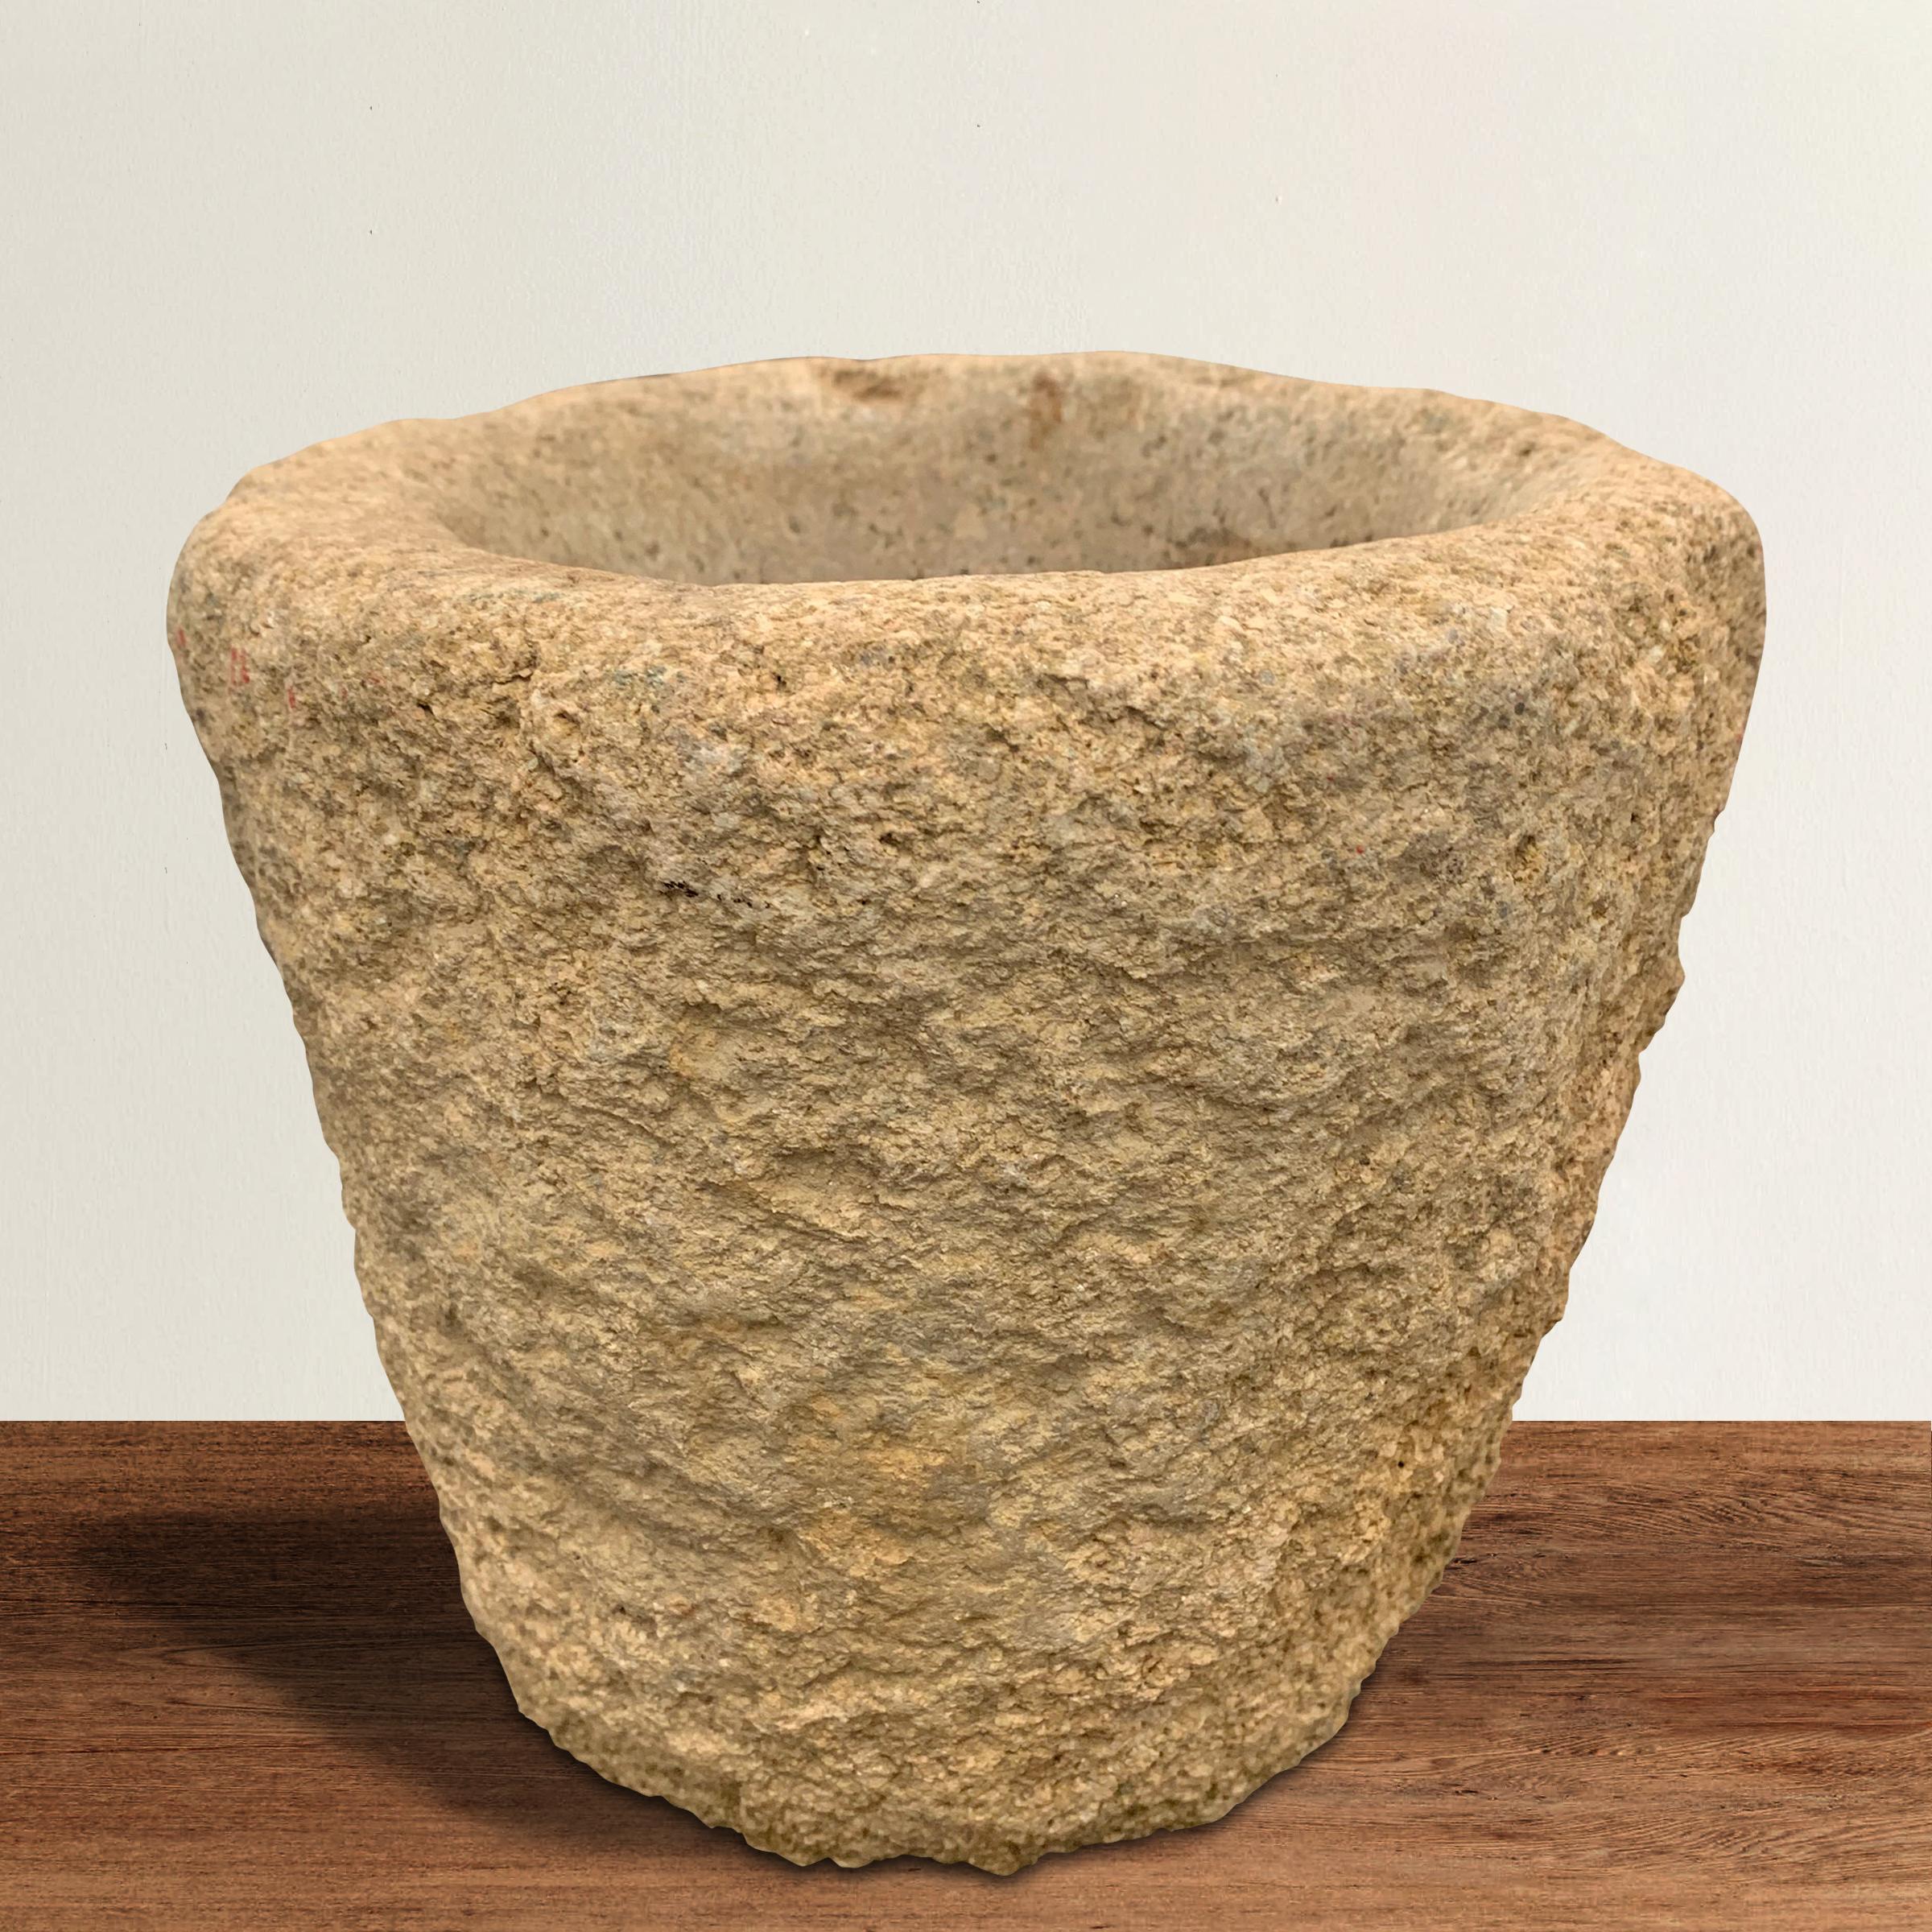 A wonderful 19th century carved limestone mortar used for crushing herbs, grains, and other foods. Wonderful finish and patina!